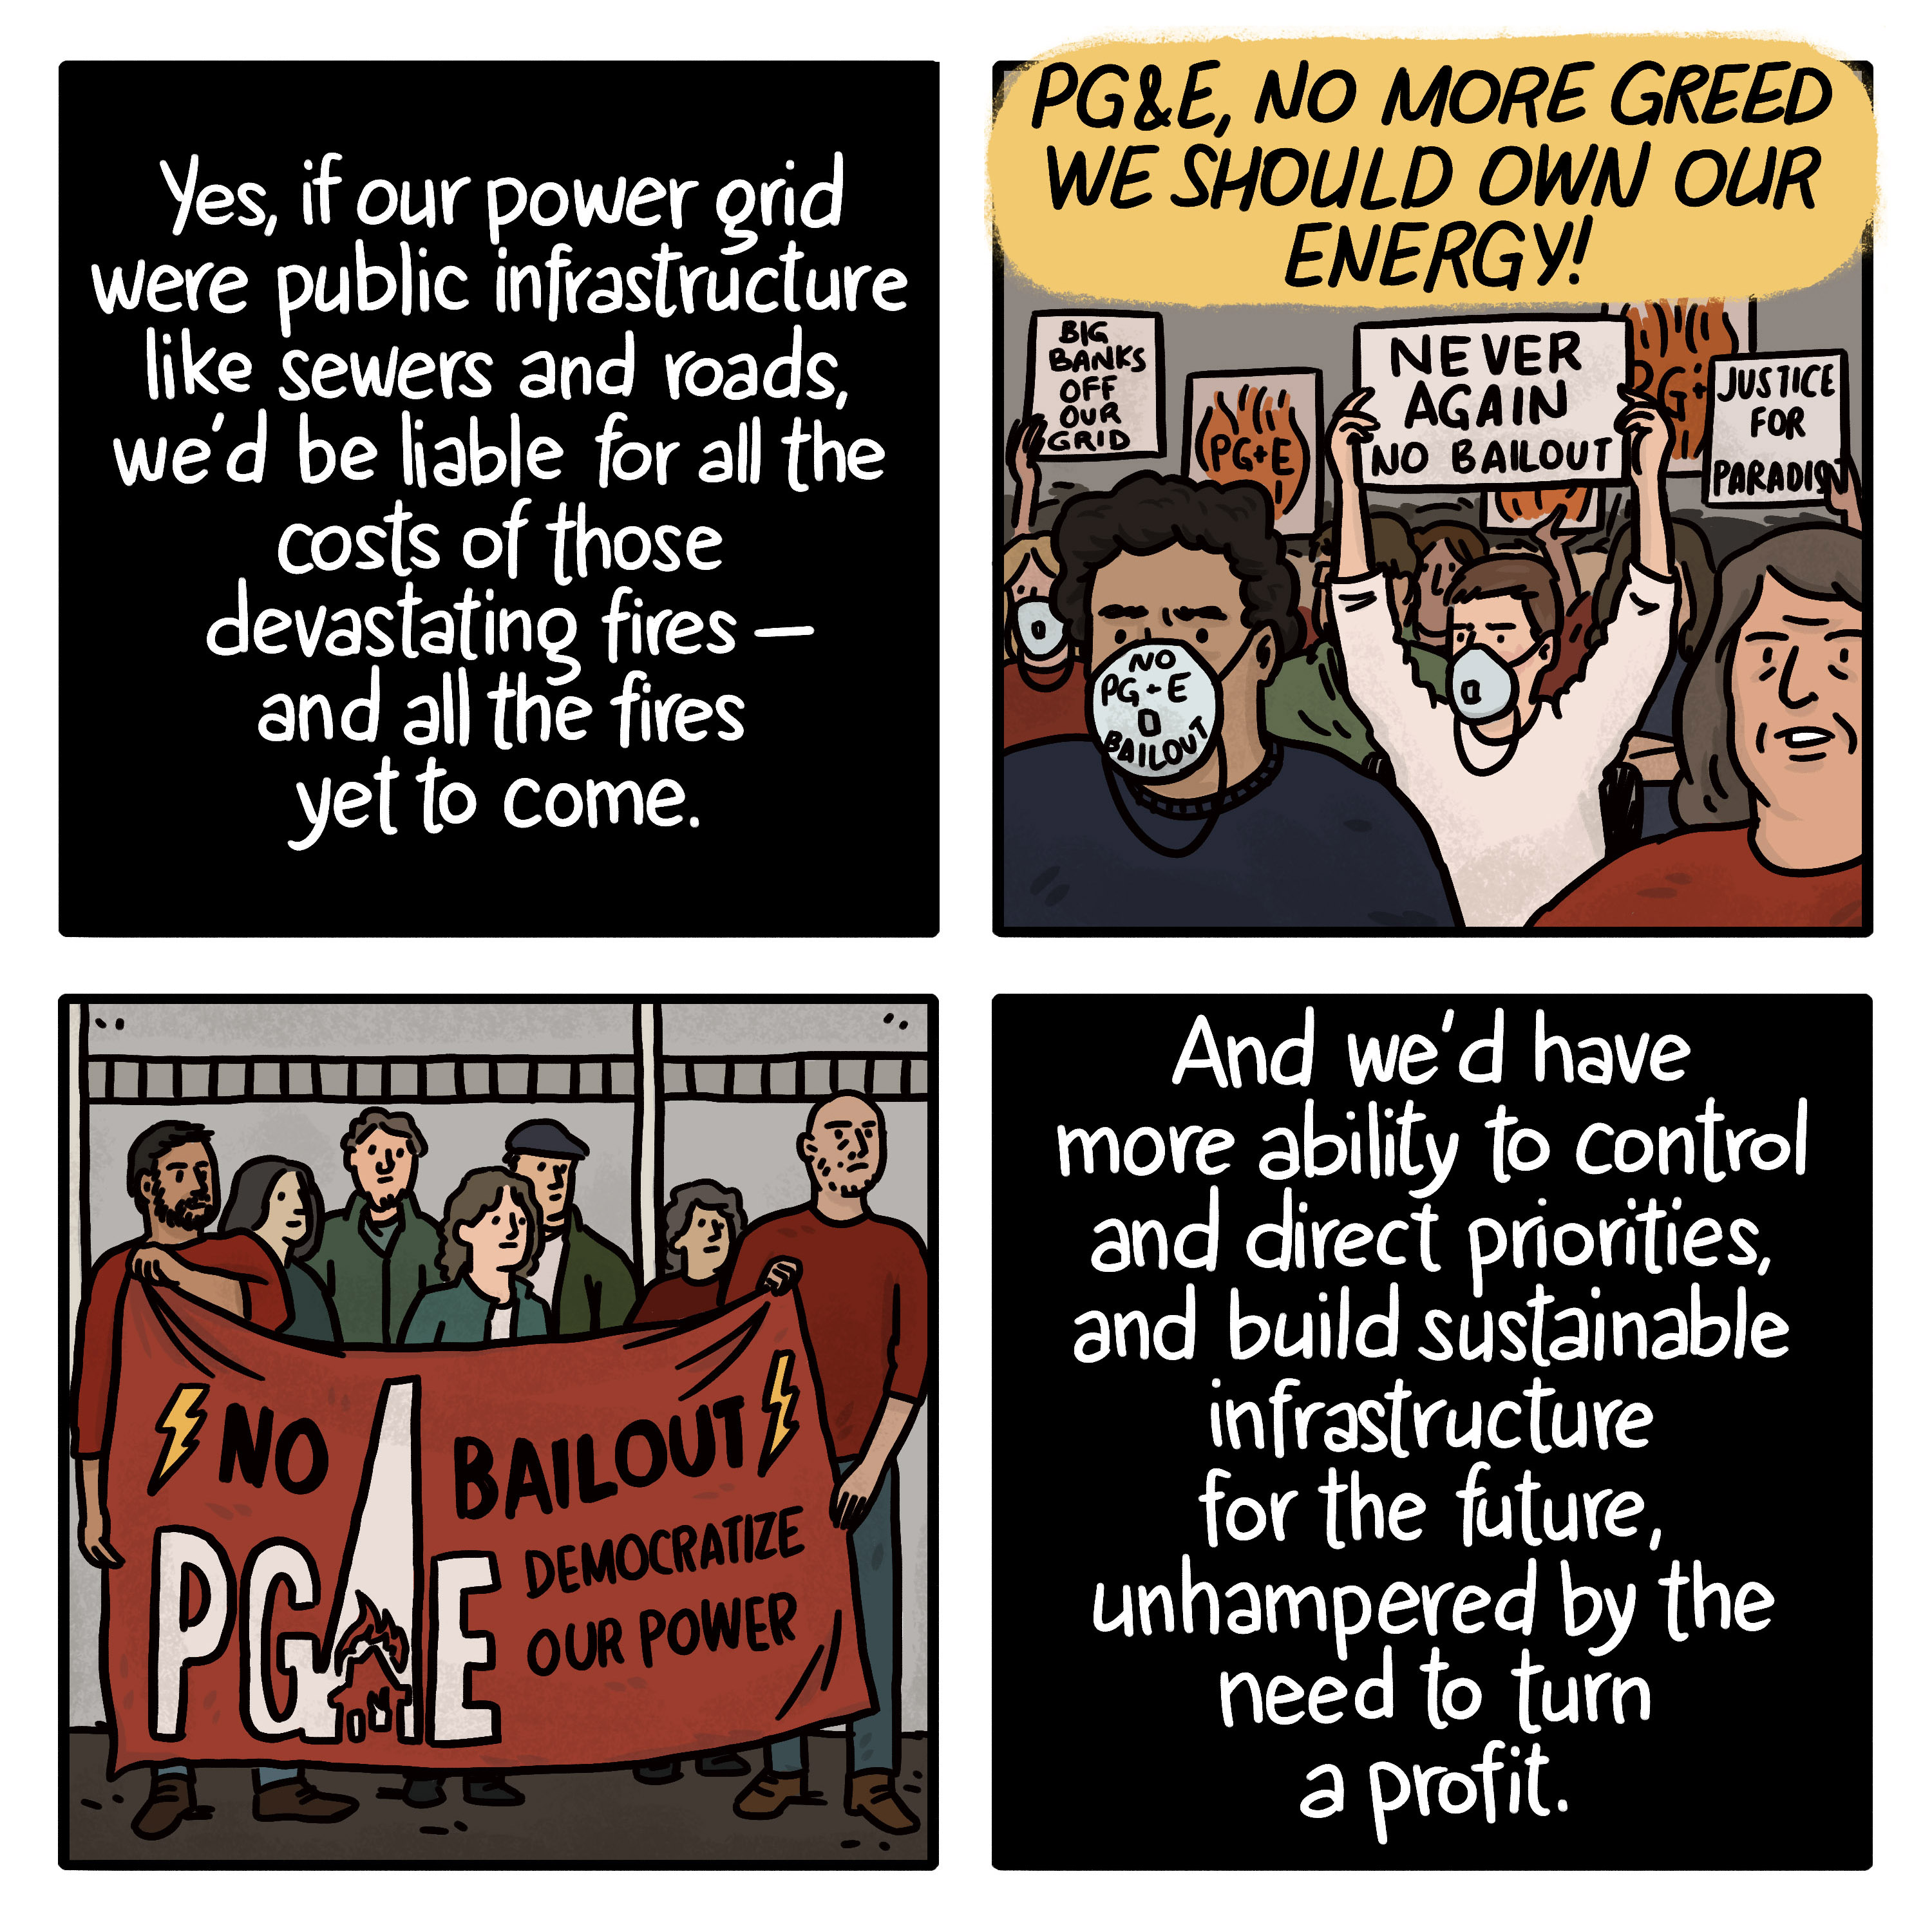 Four-panel illustration showing anti-PG&E protestors, who argue that if the power grid were public infrastructure instead of private, citizens would be directly on the hook for costs—but would have more control over how to build infrastructure for the future.